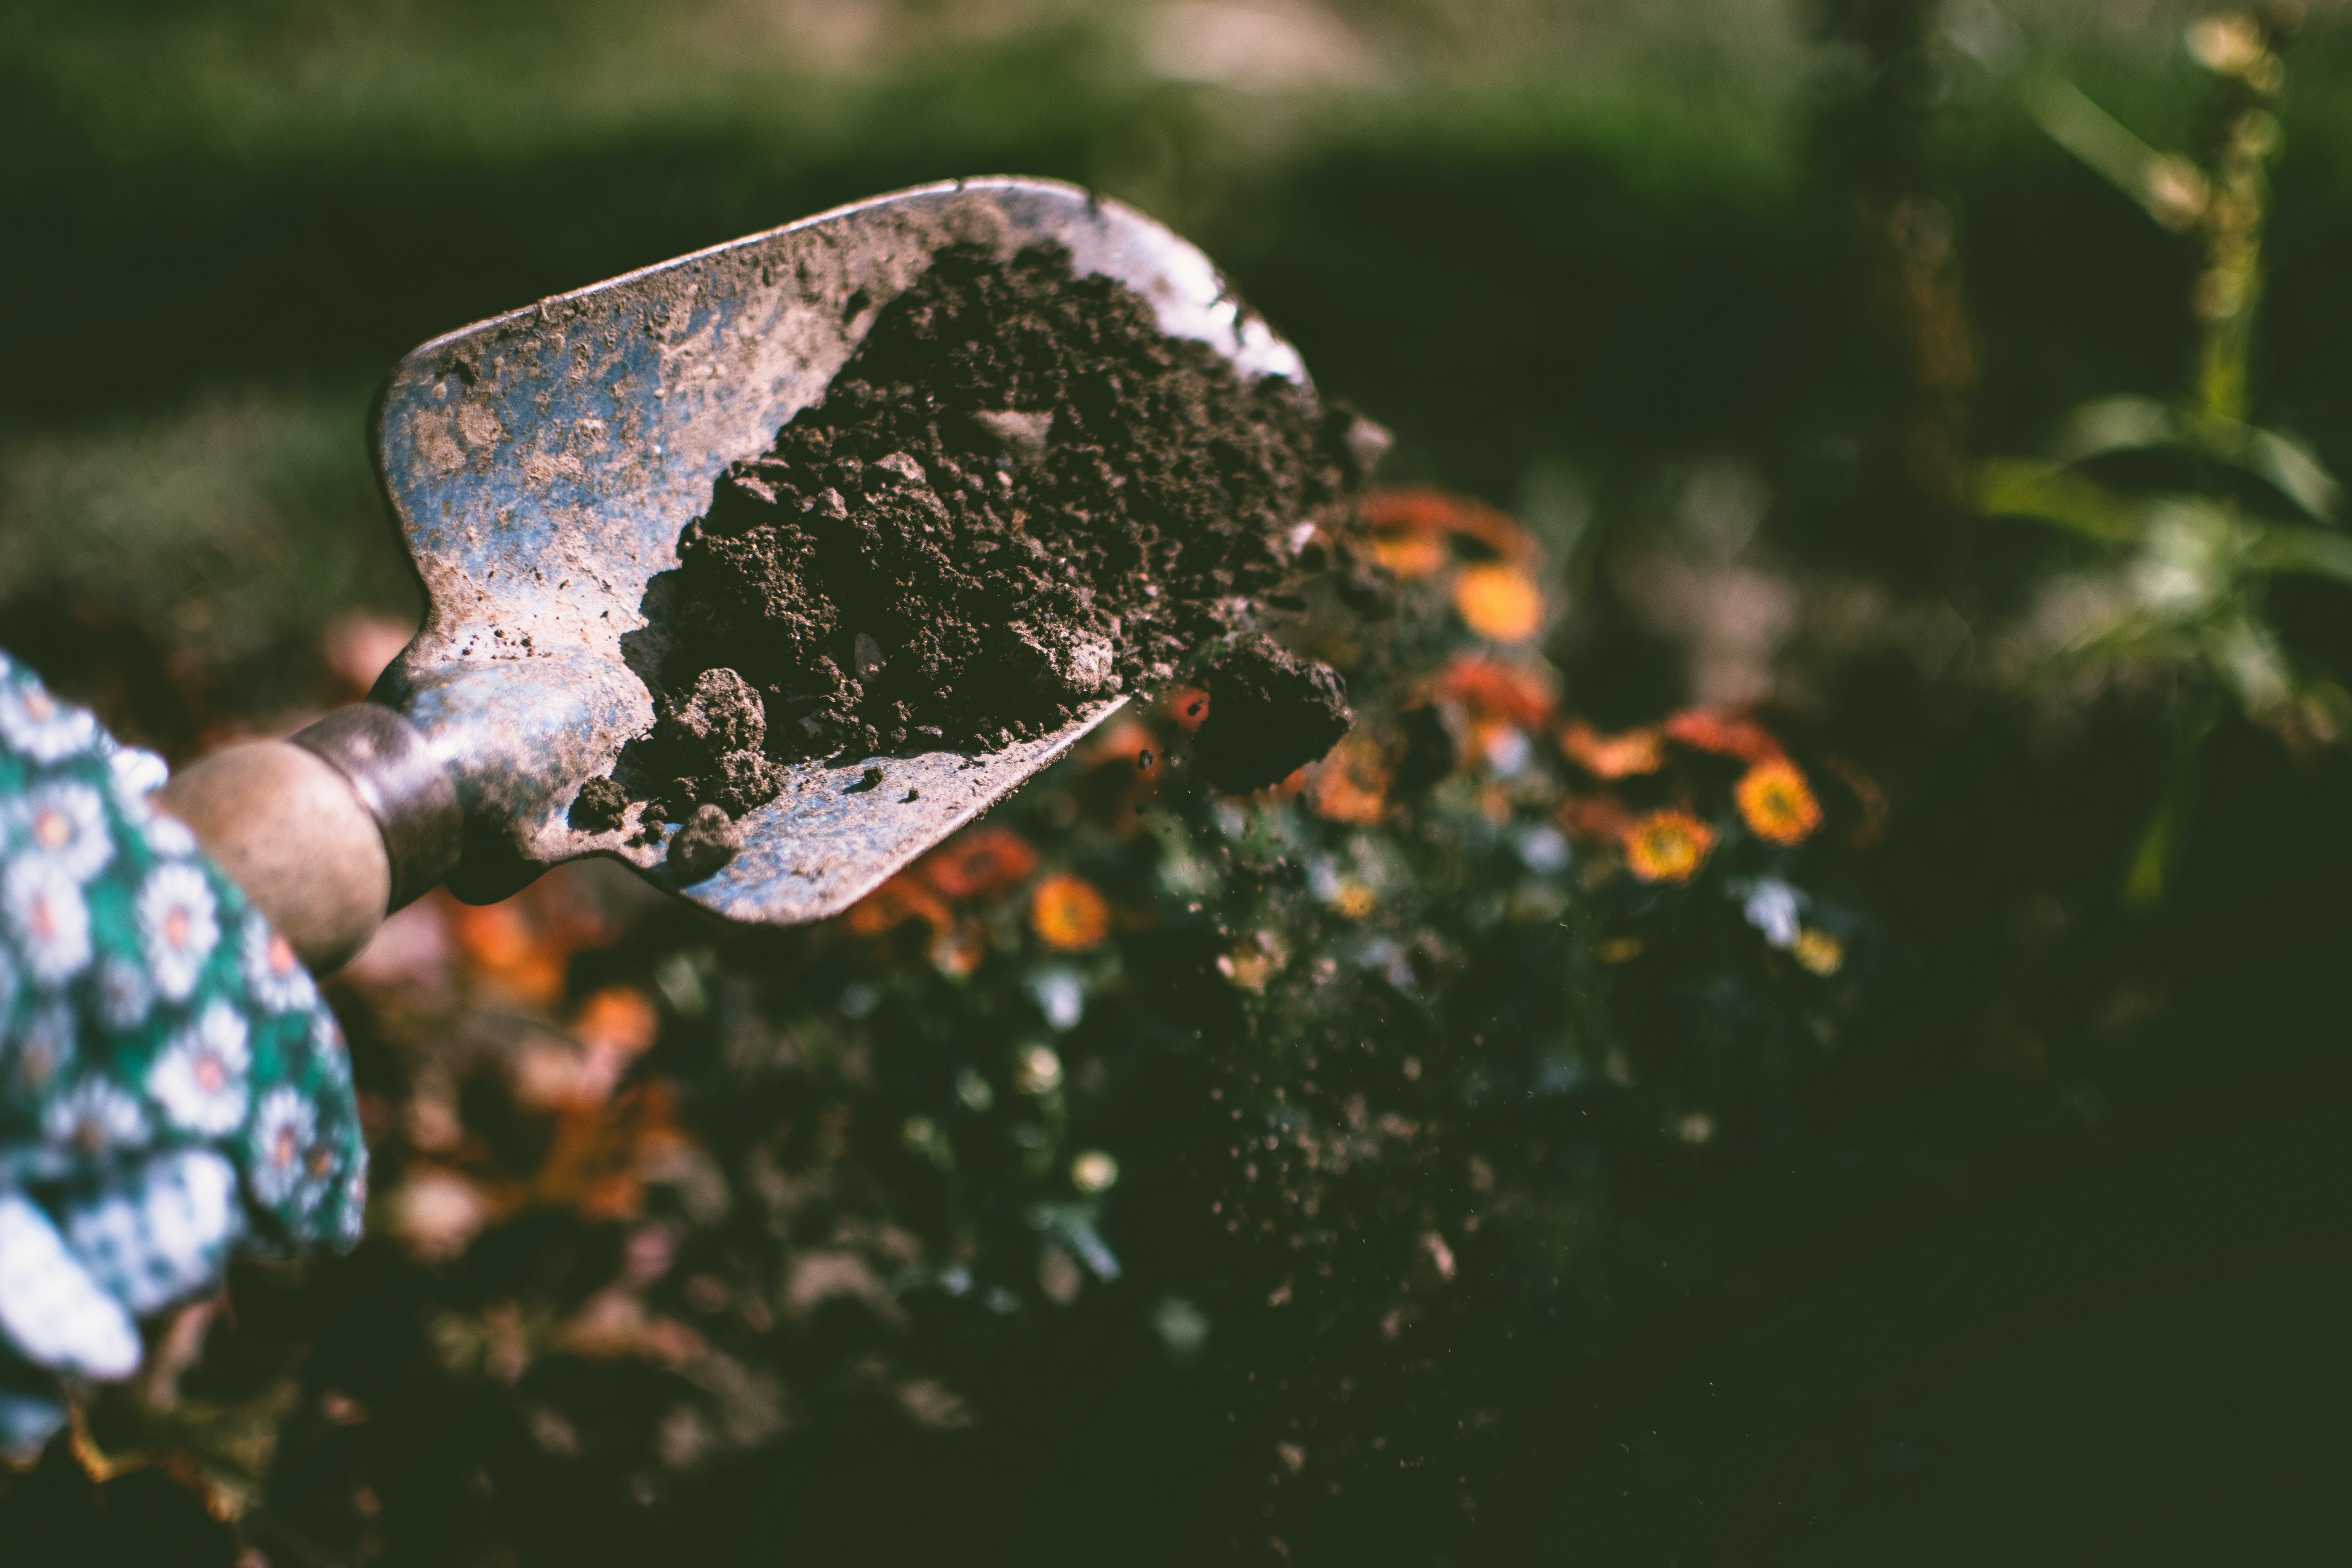 Picture of a dirt on a spade.